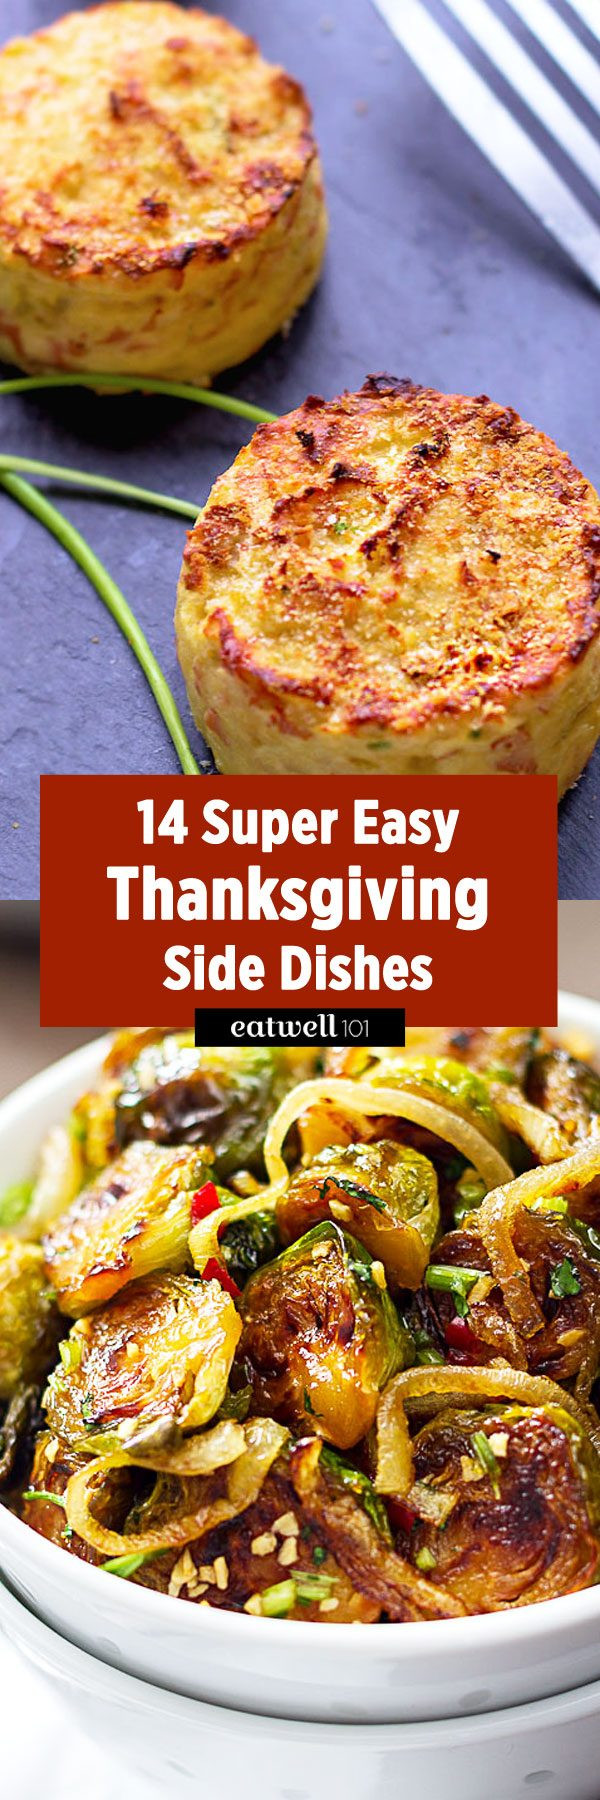 Easy Side Dishes For Thanksgiving Meal
 Up Your Thanksgiving With These Super Easy Side Dishes